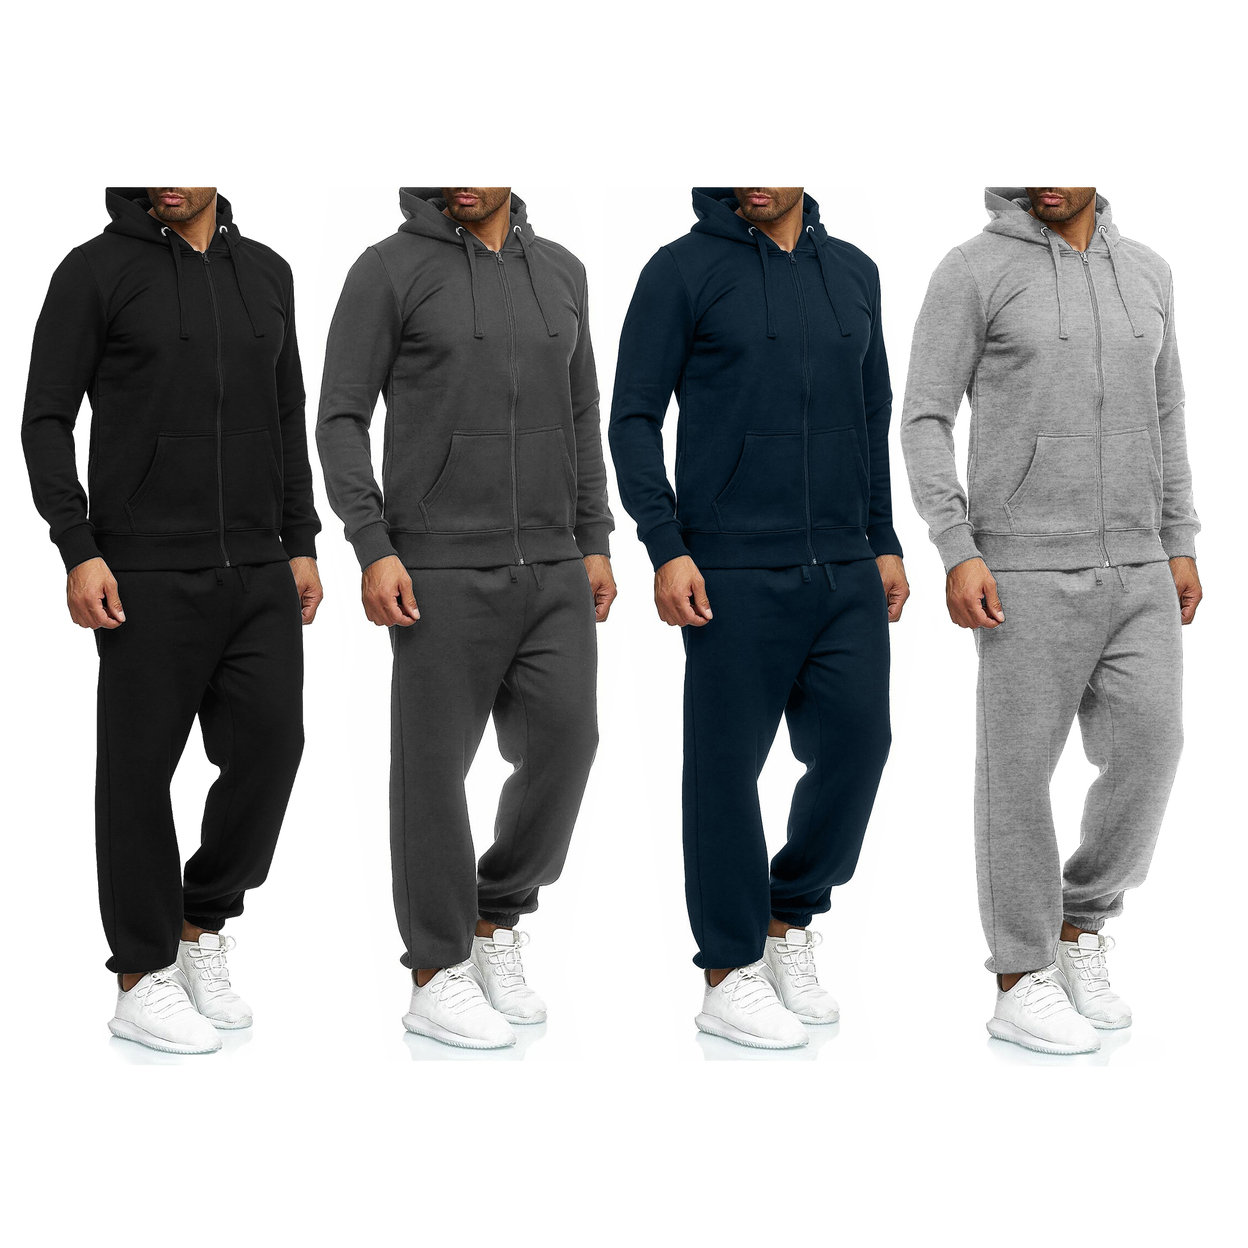 Multi-Pack: Men's Casual Big & Tall Athletic Active Winter Warm Fleece Lined Full Zip Tracksuit Jogger Set - Navy, 2-pack, 3xl